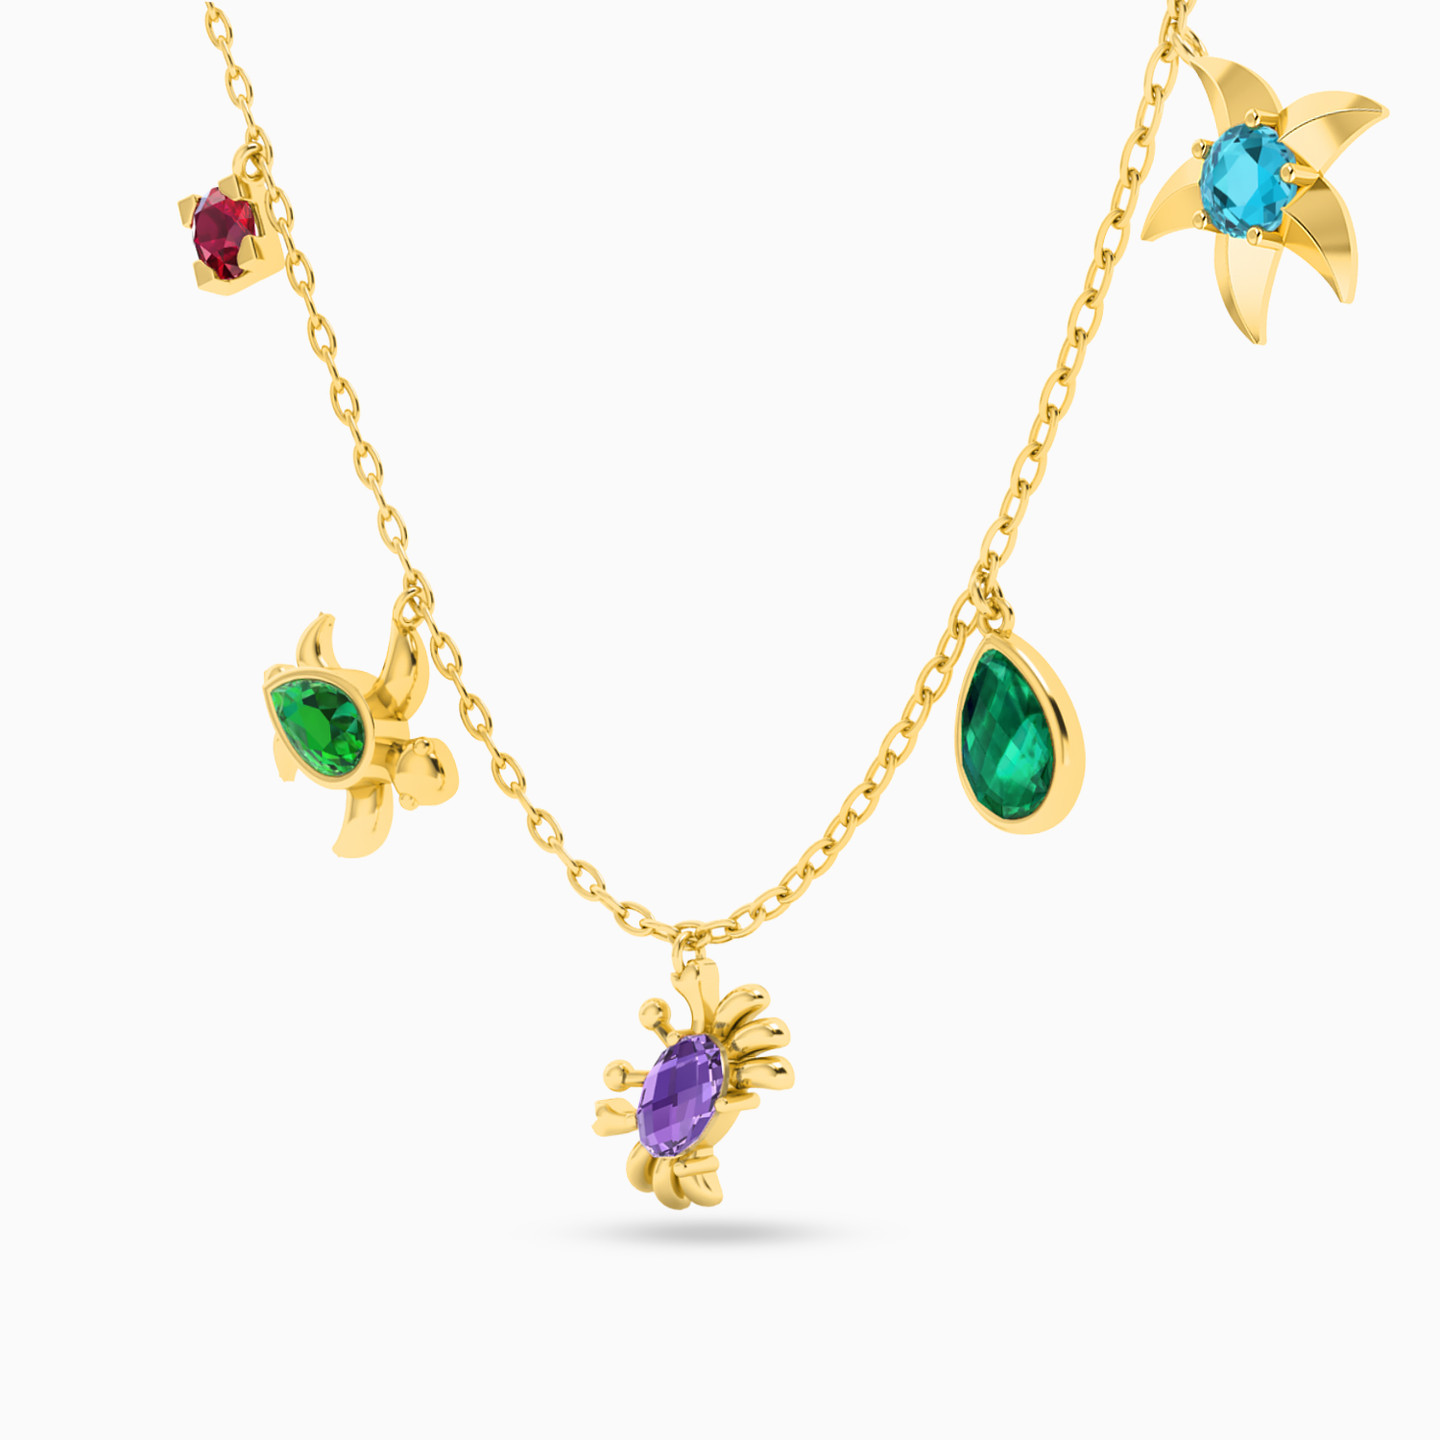 18K Gold Colored Stones Chain Necklace - 2